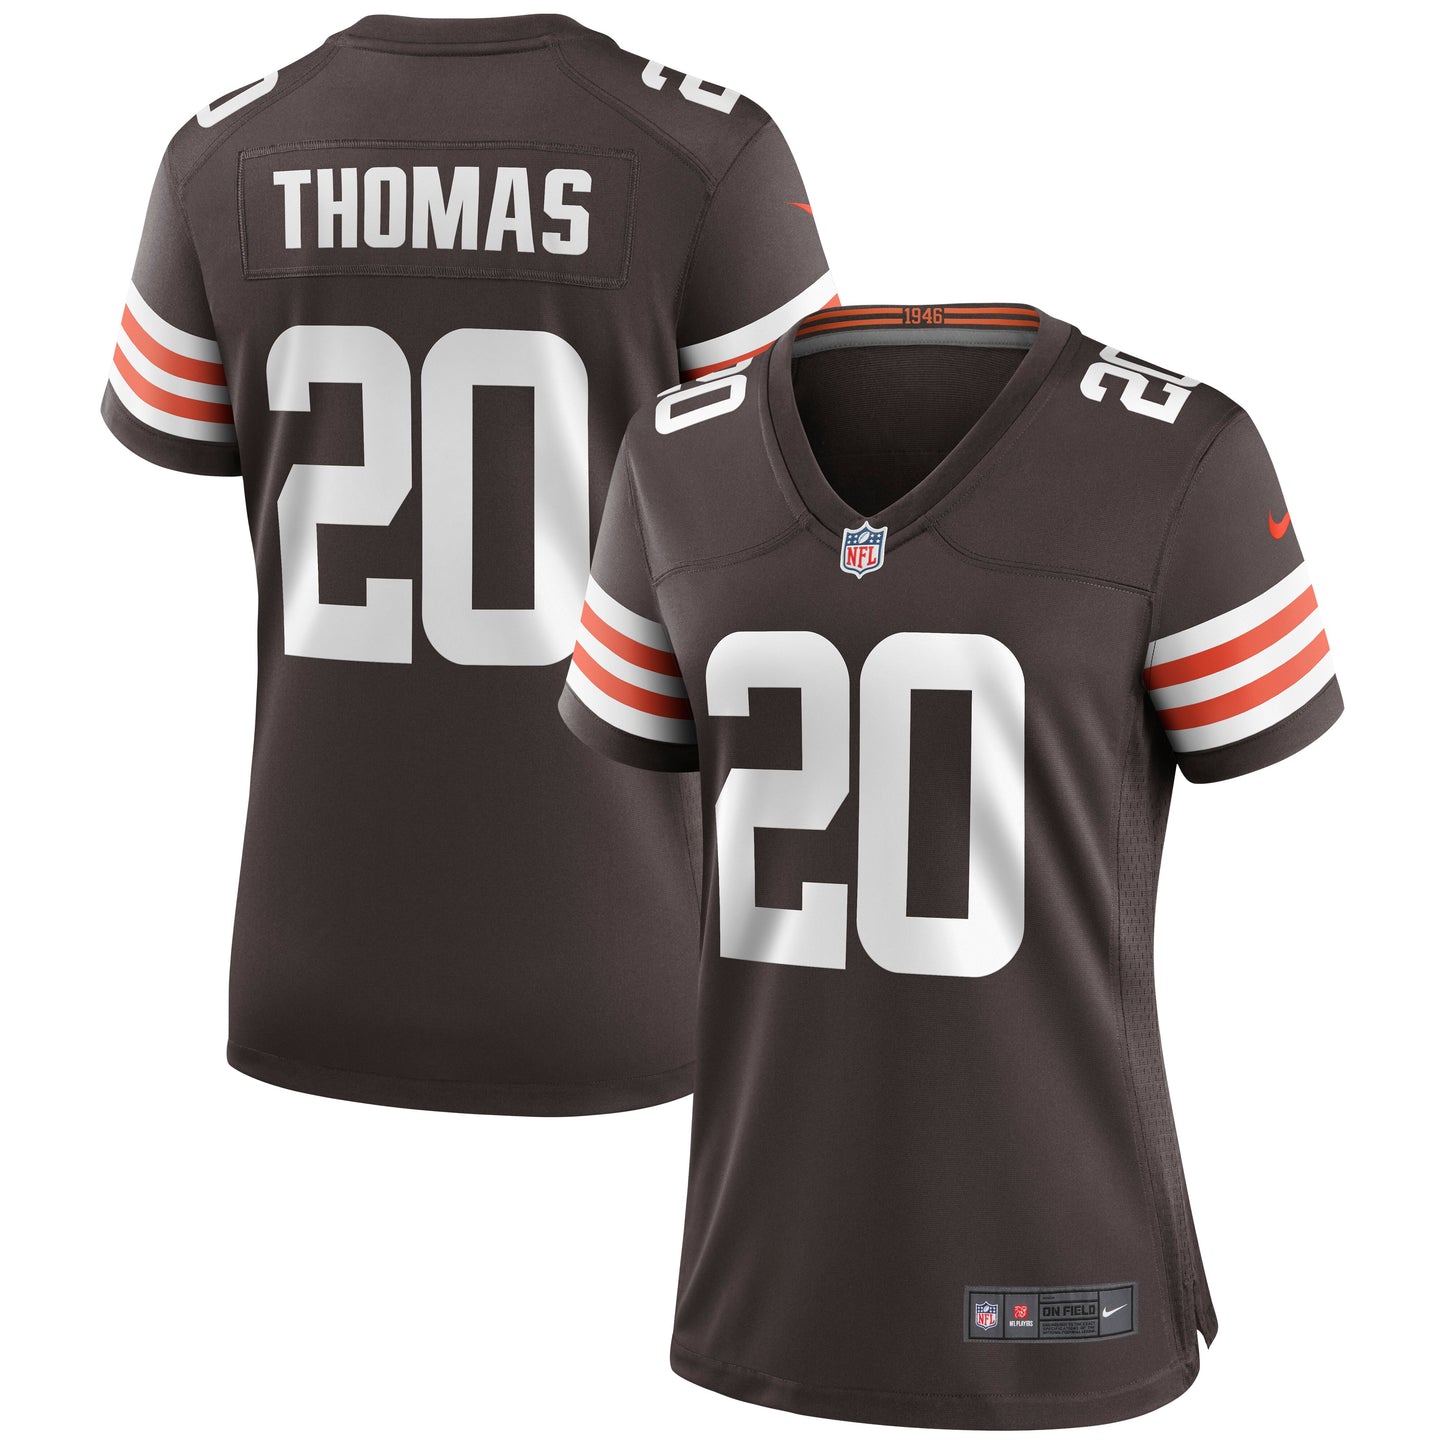 Tavierre Thomas Cleveland Browns Nike Women's Game Jersey - Brown